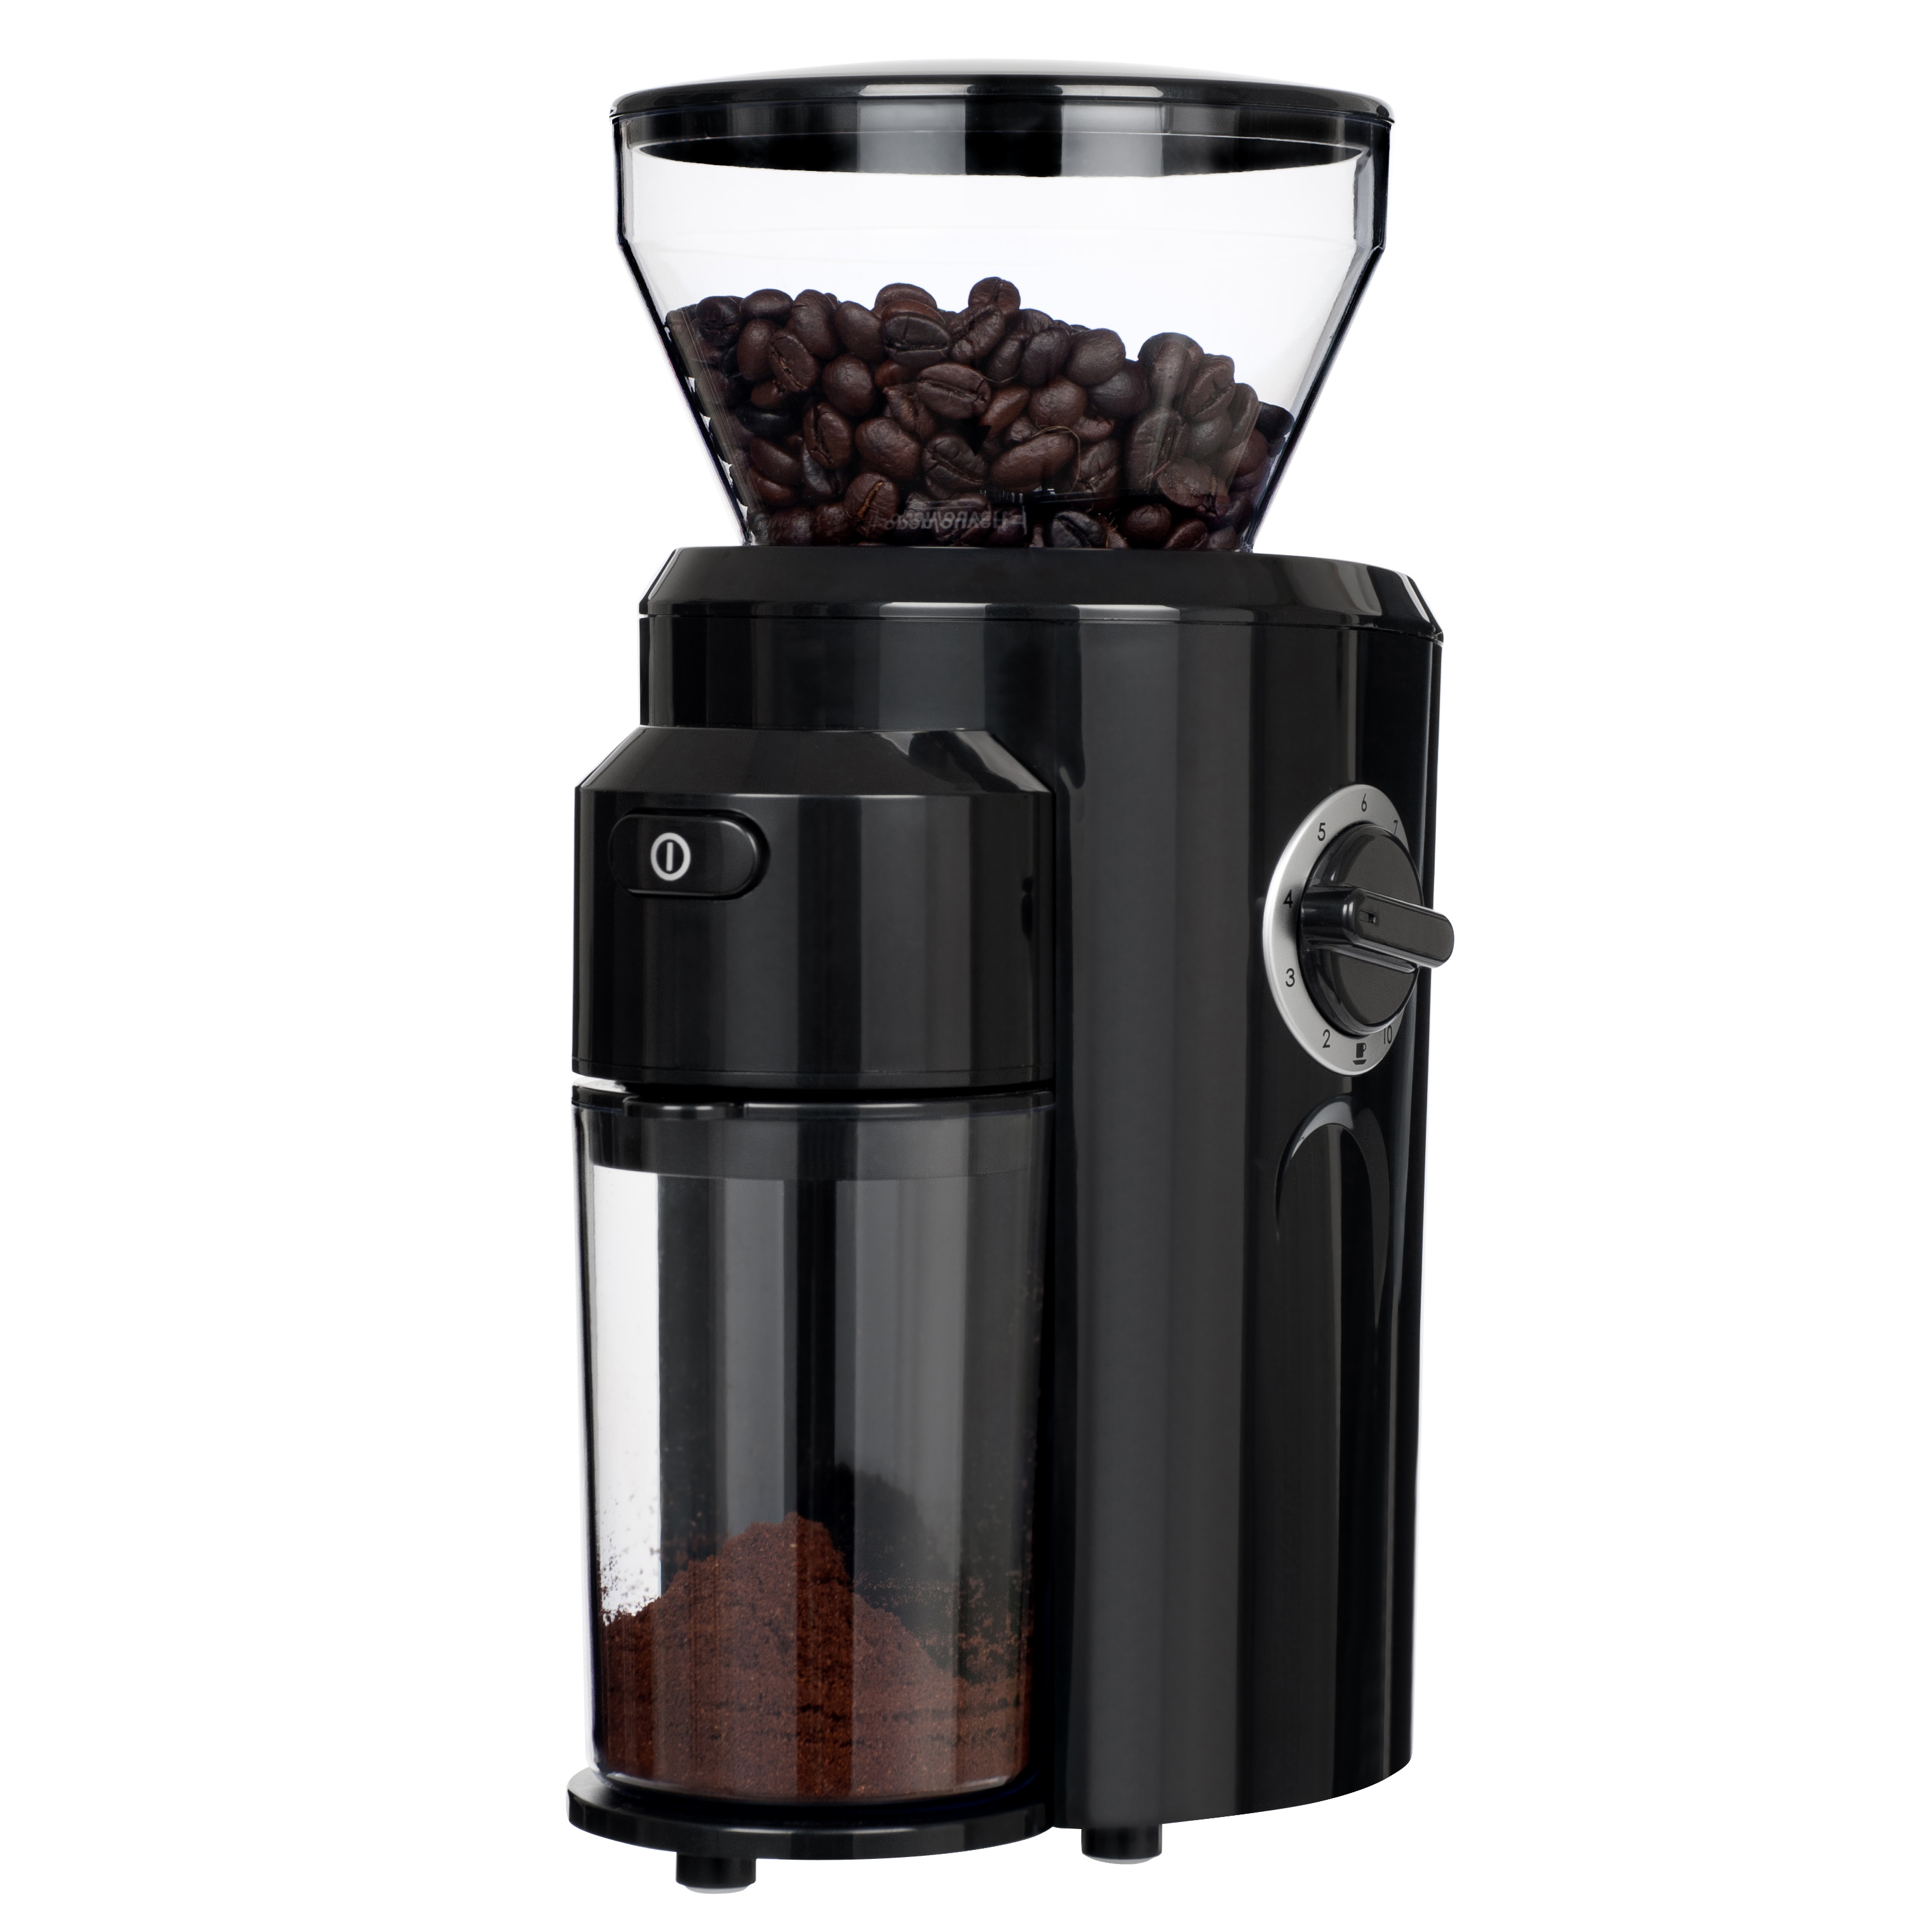 Secura Conical Burr Coffee Grinder American and Turkish Coffee Makers Drip Percolator Electric Coffee Grinder for French Press Adjustable Burr Mill with 18 Precise Grind Settings 